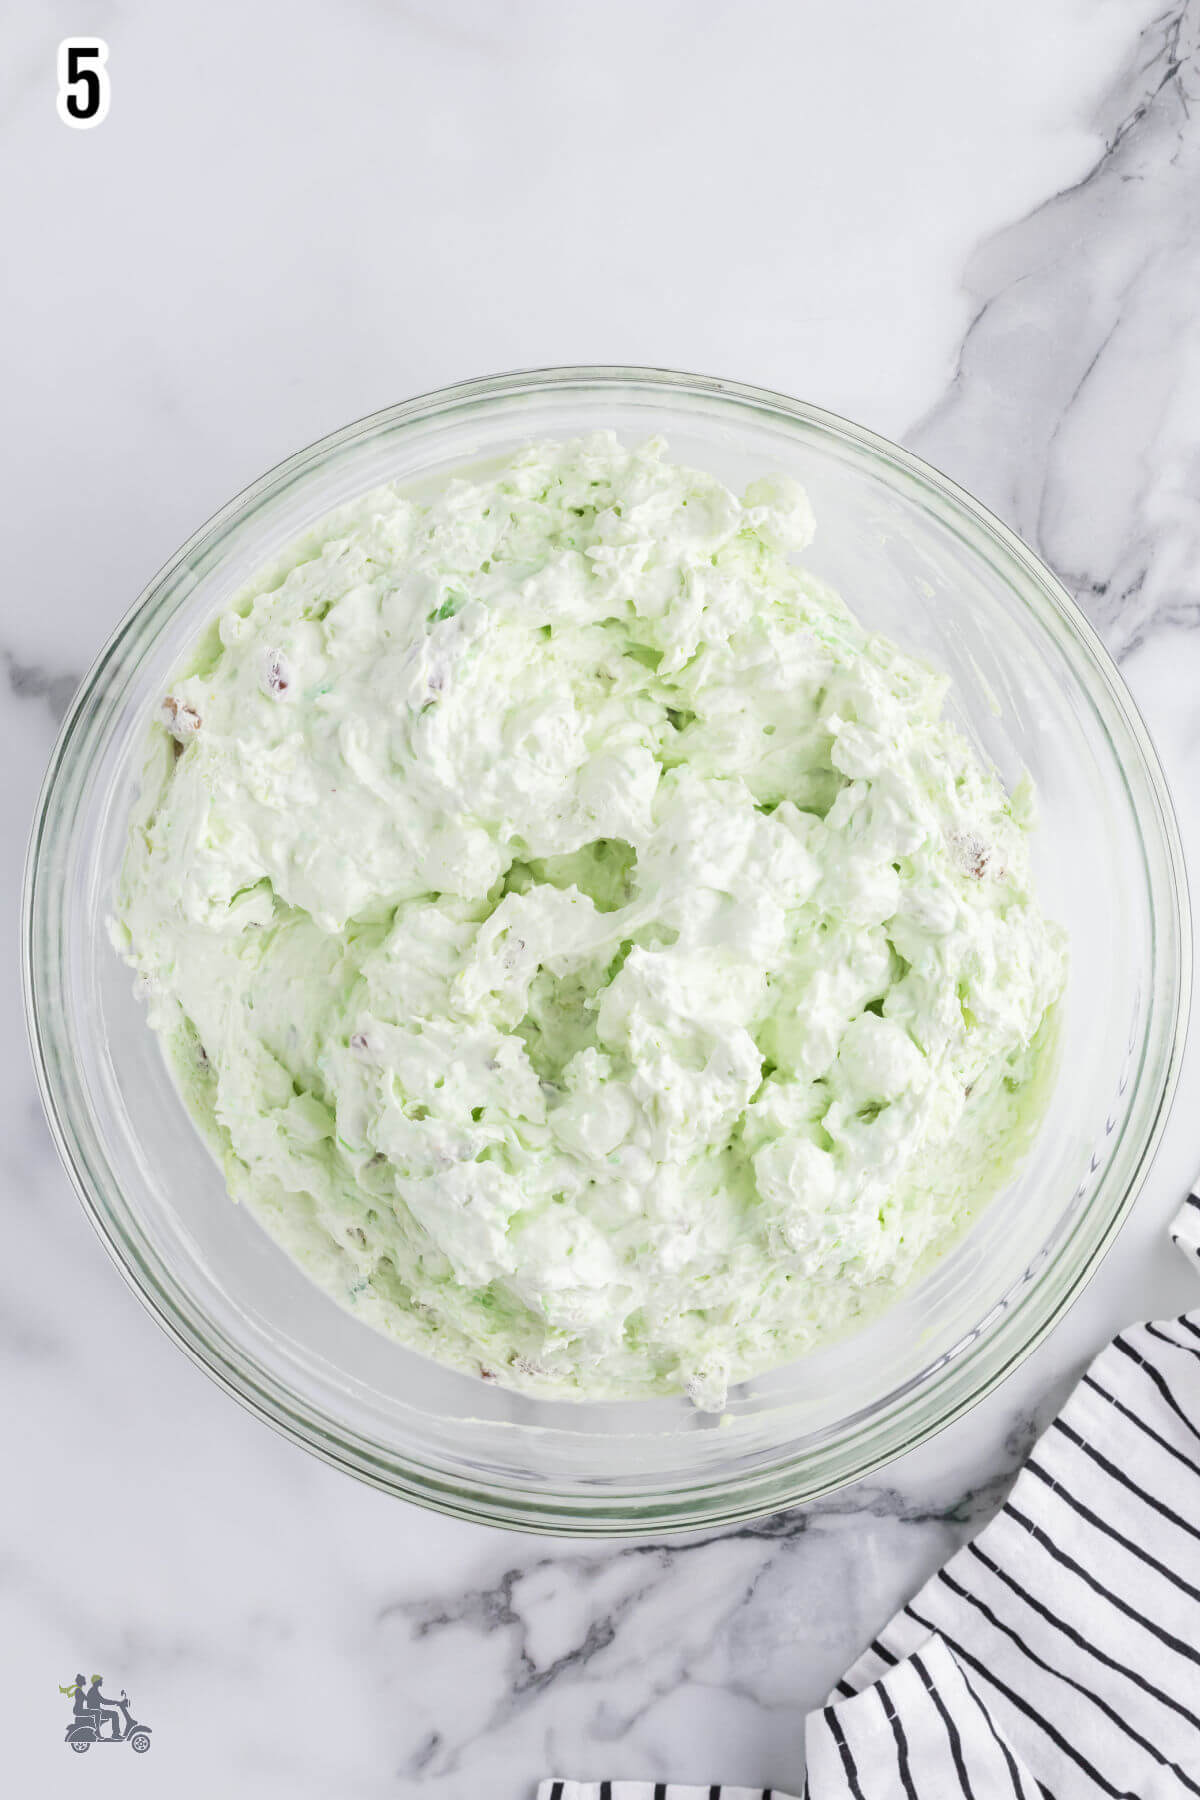 Last step to making the Watergate salad is to add the whipped cream and nuts. 